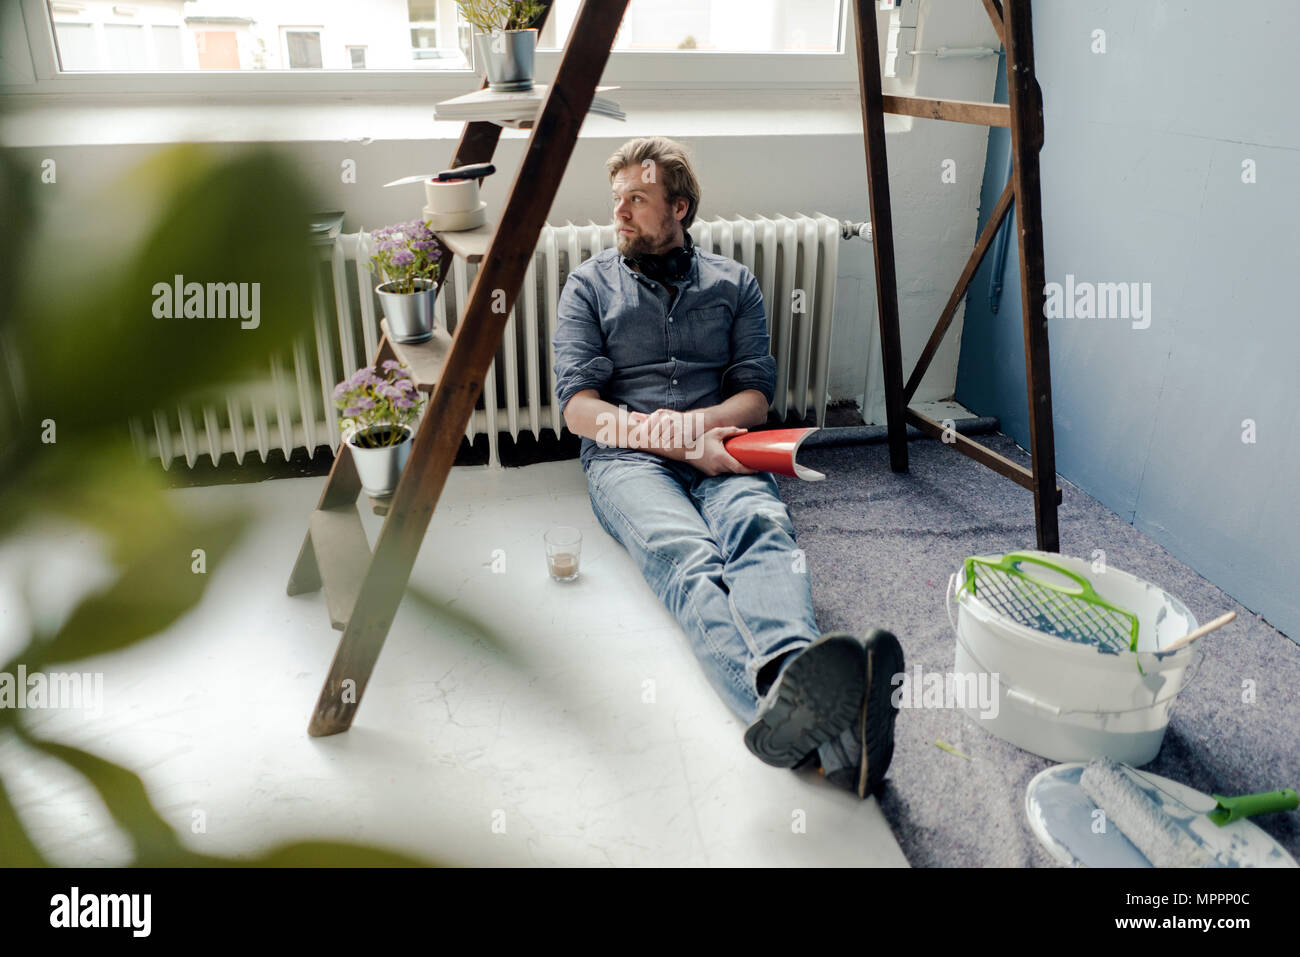 Man renovating room sitting on the floor having a rest Stock Photo